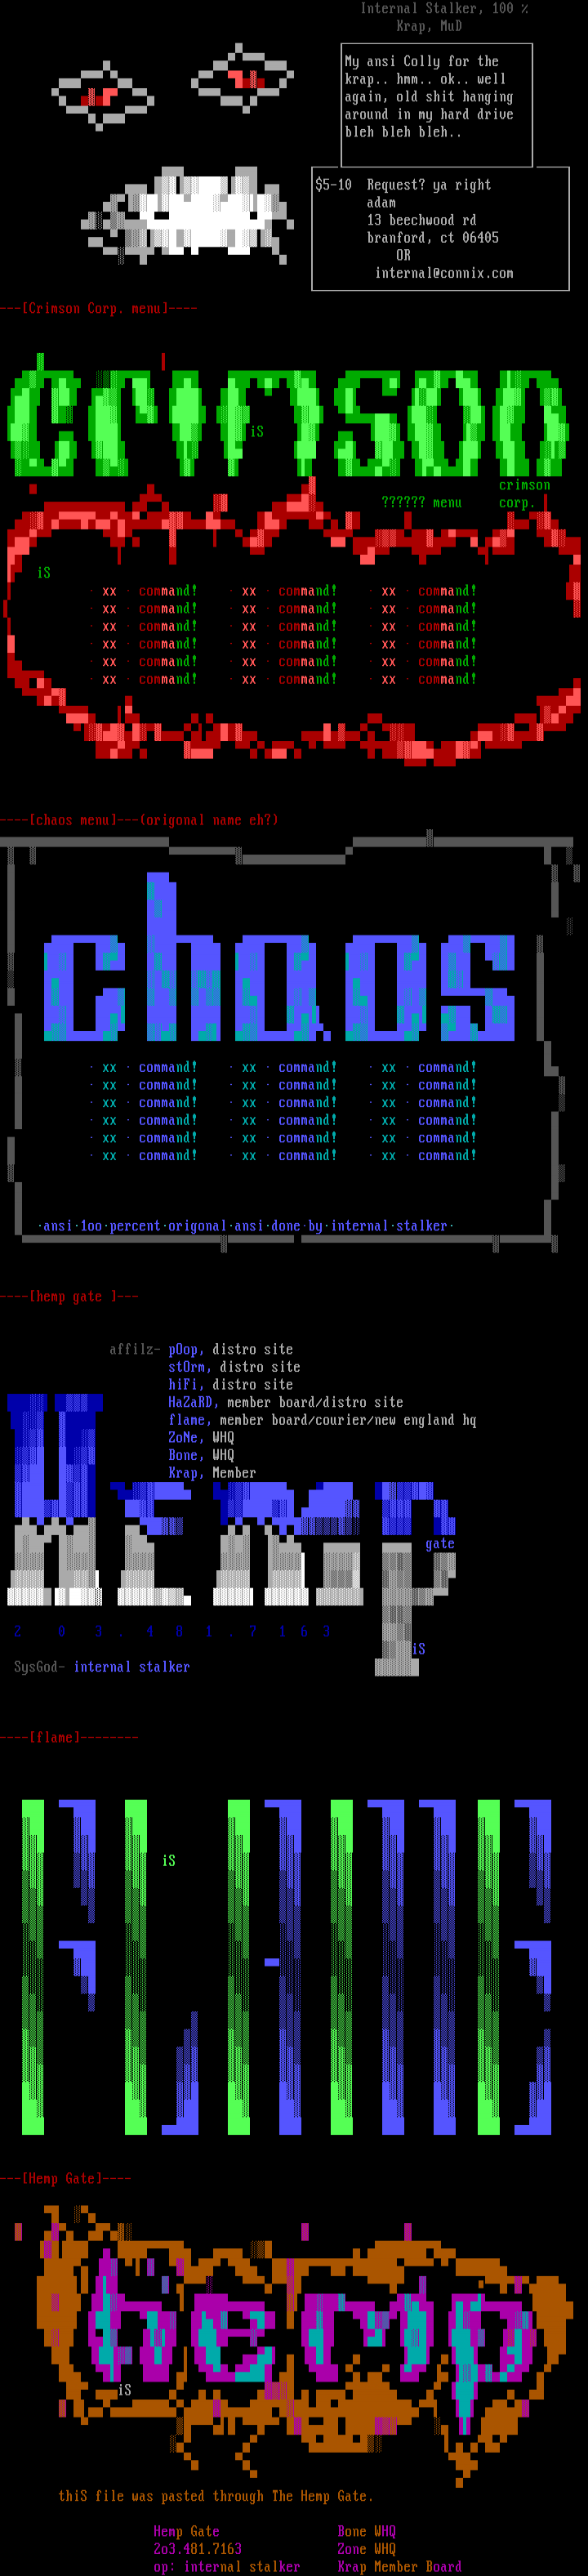 ansi colly for you by internal stalker